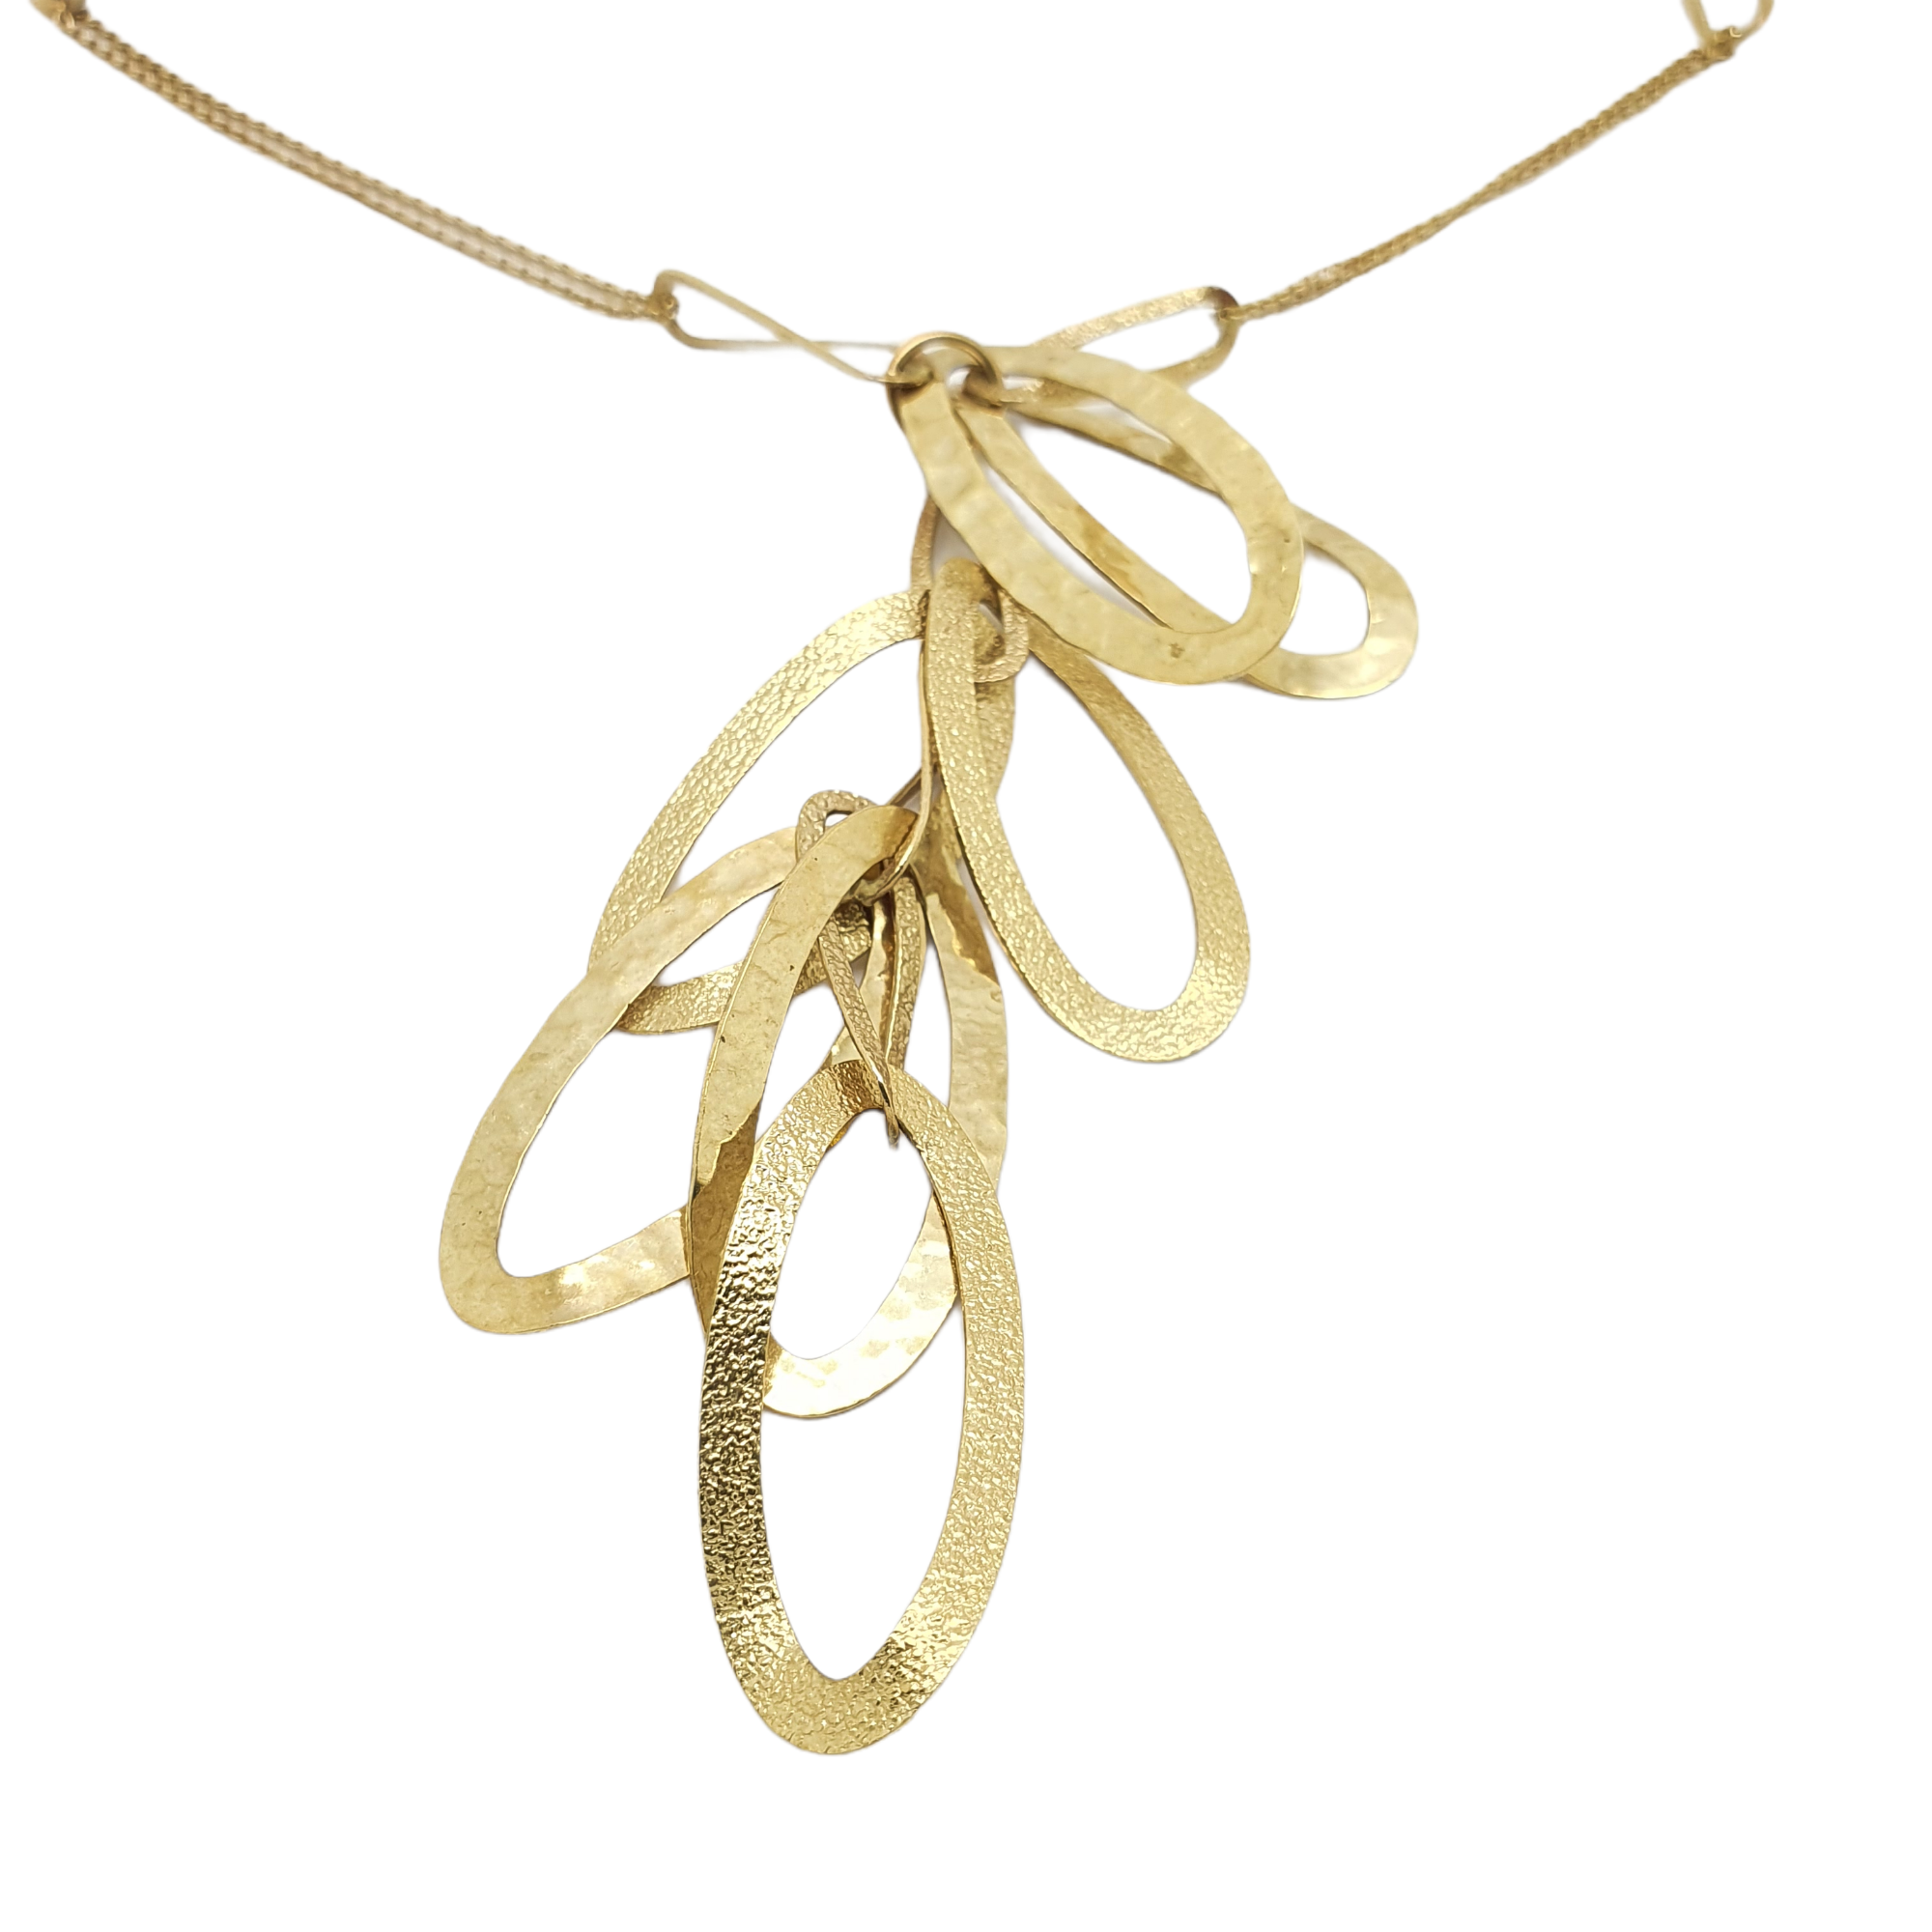 Golden necklace k14 with oval leaves (code S2034)